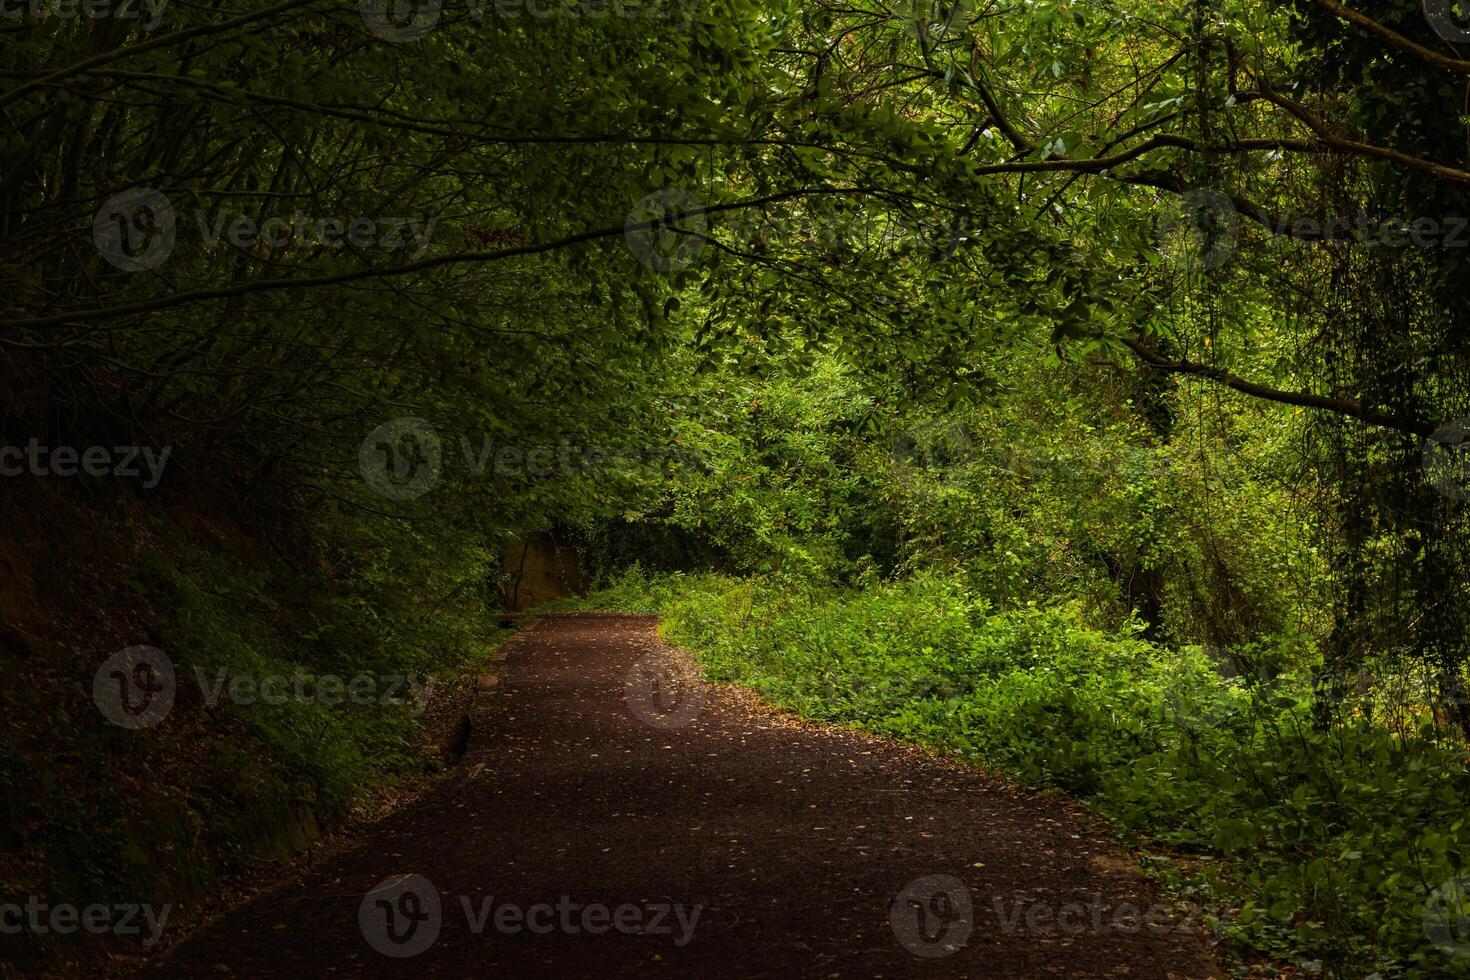 A path or trail in the lush forest. Moody forest view photo